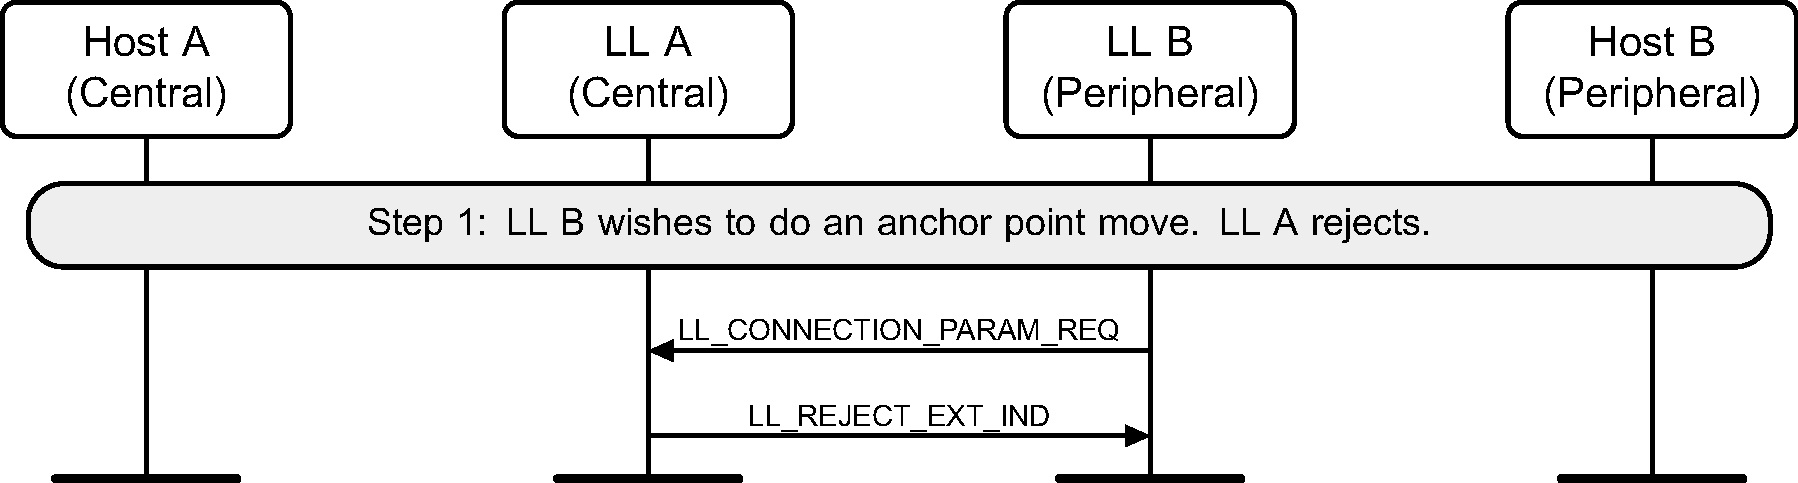 Peripheral-initiated Connection Parameters Request procedure – Peripheral requests a change in anchor points, Central rejects